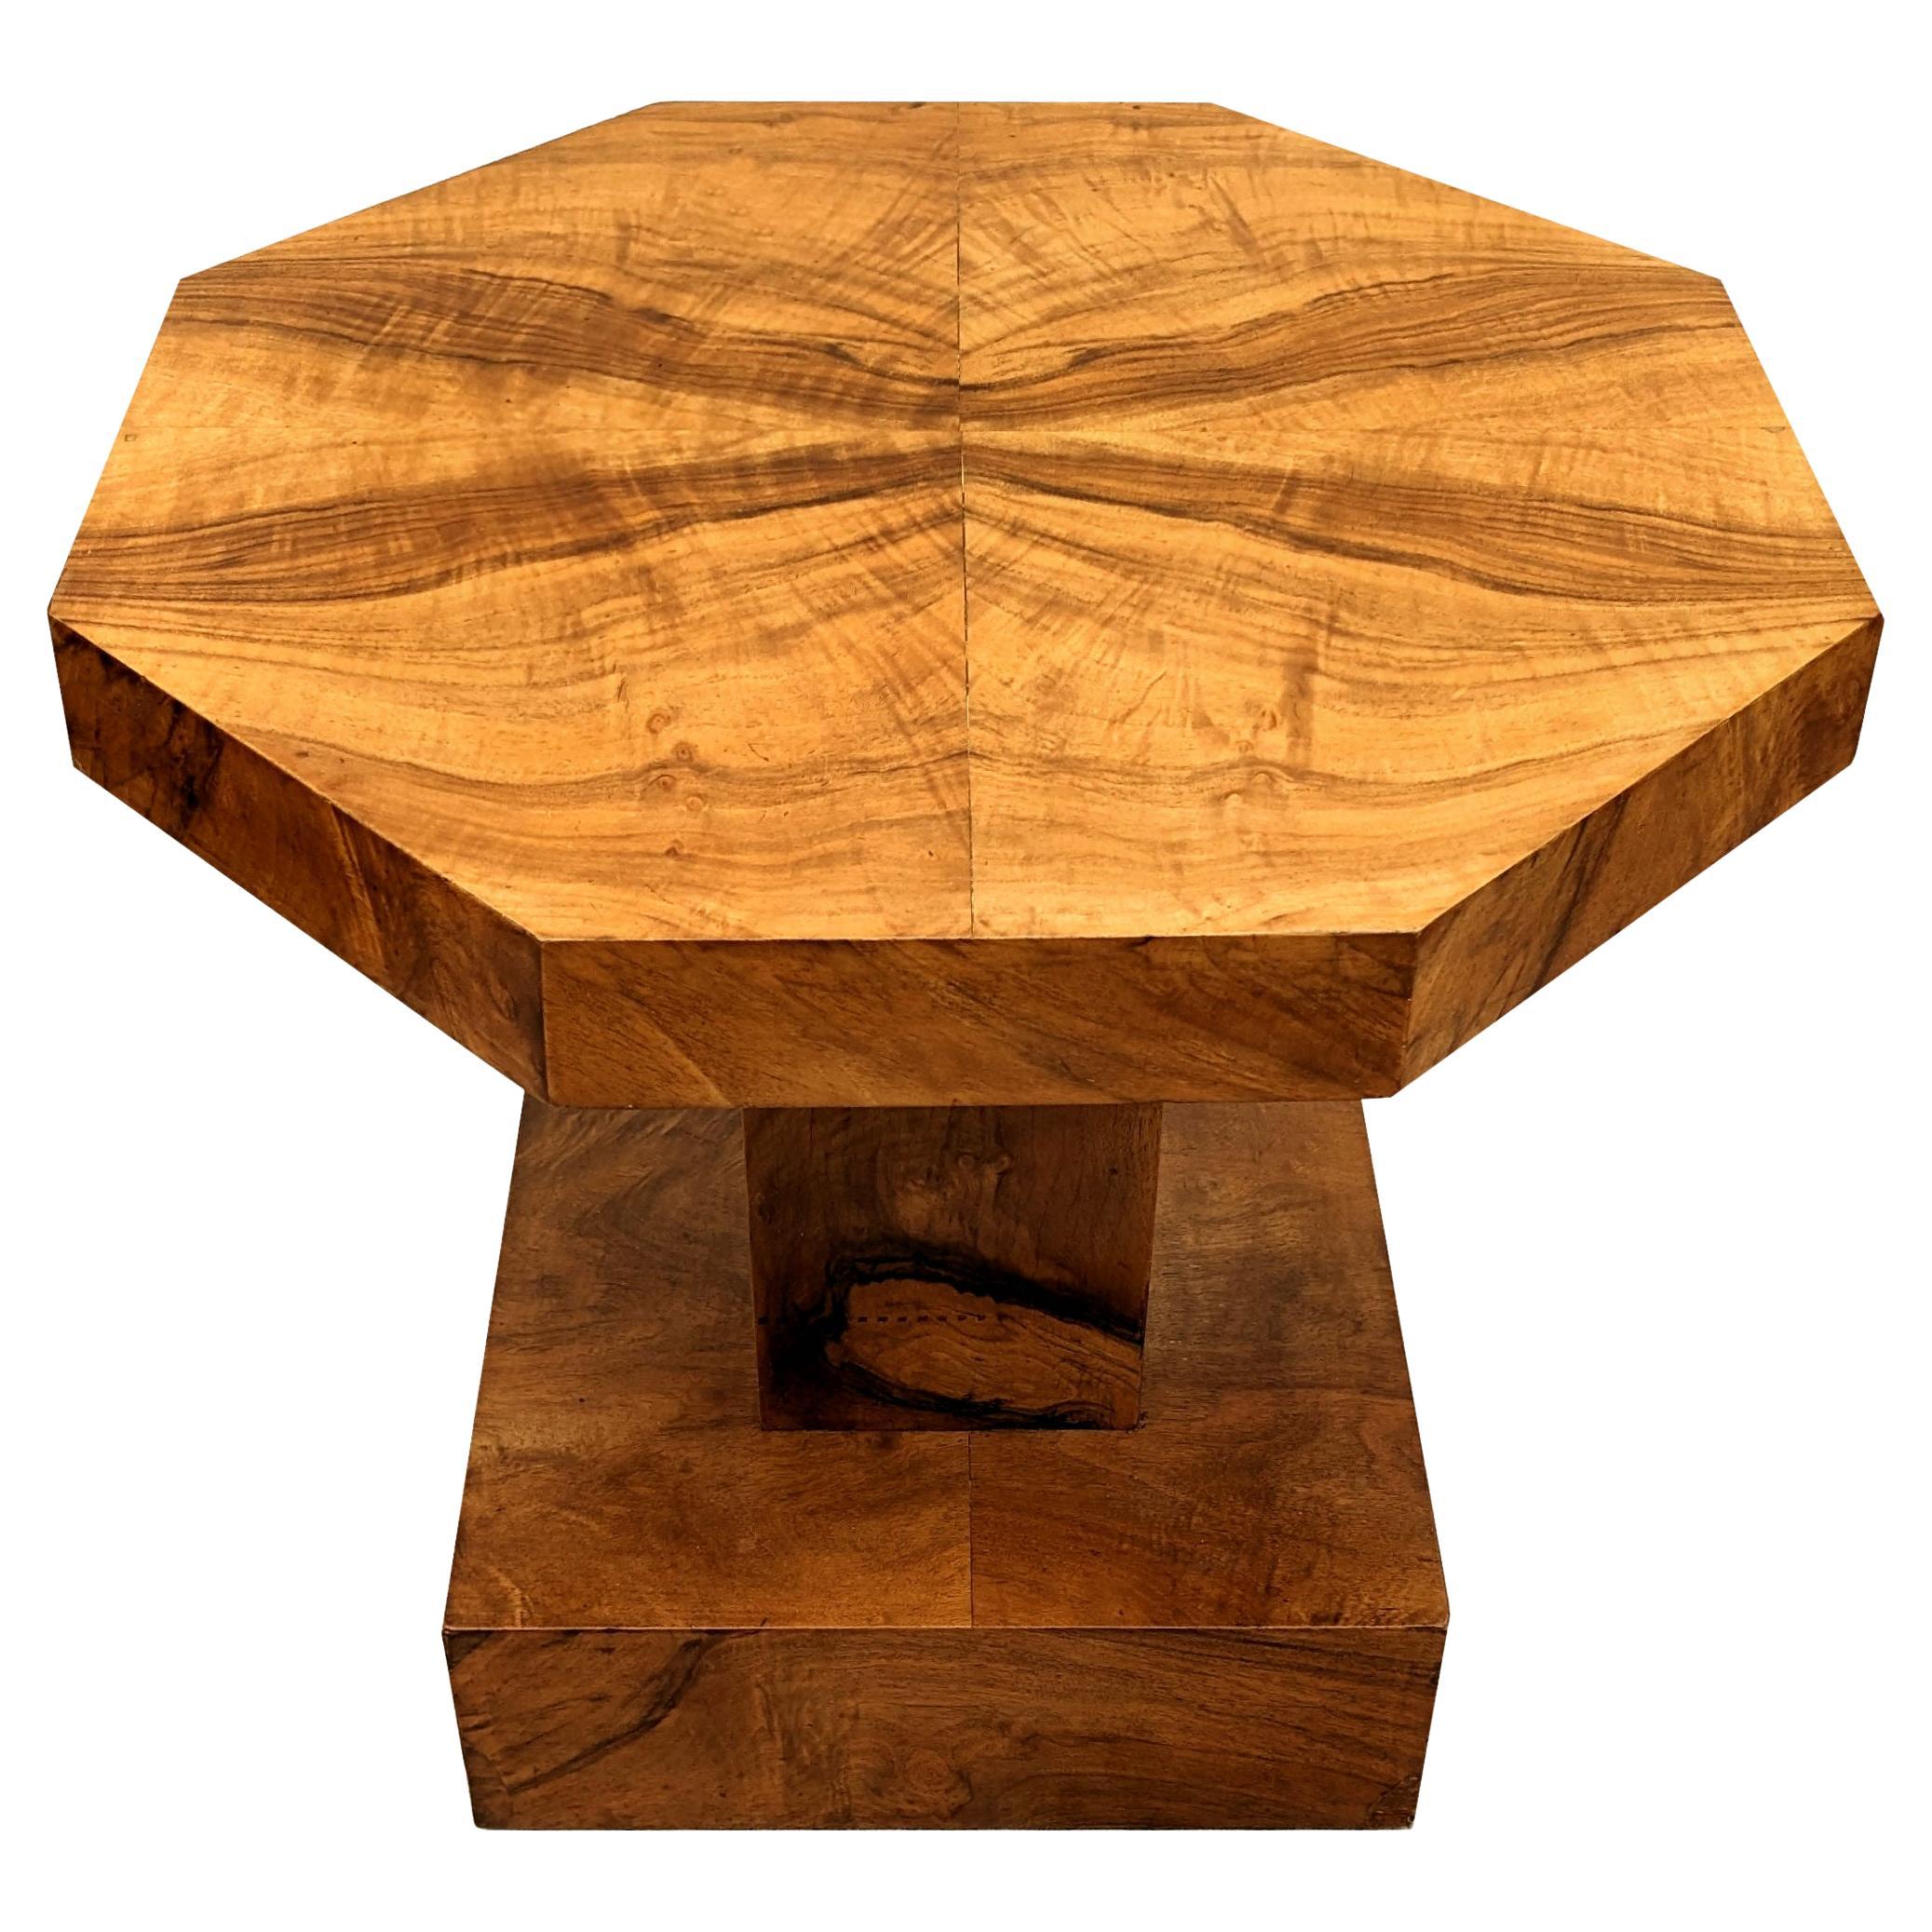 Art Deco Figured Walnut Occasional Table, English, c1930 For Sale